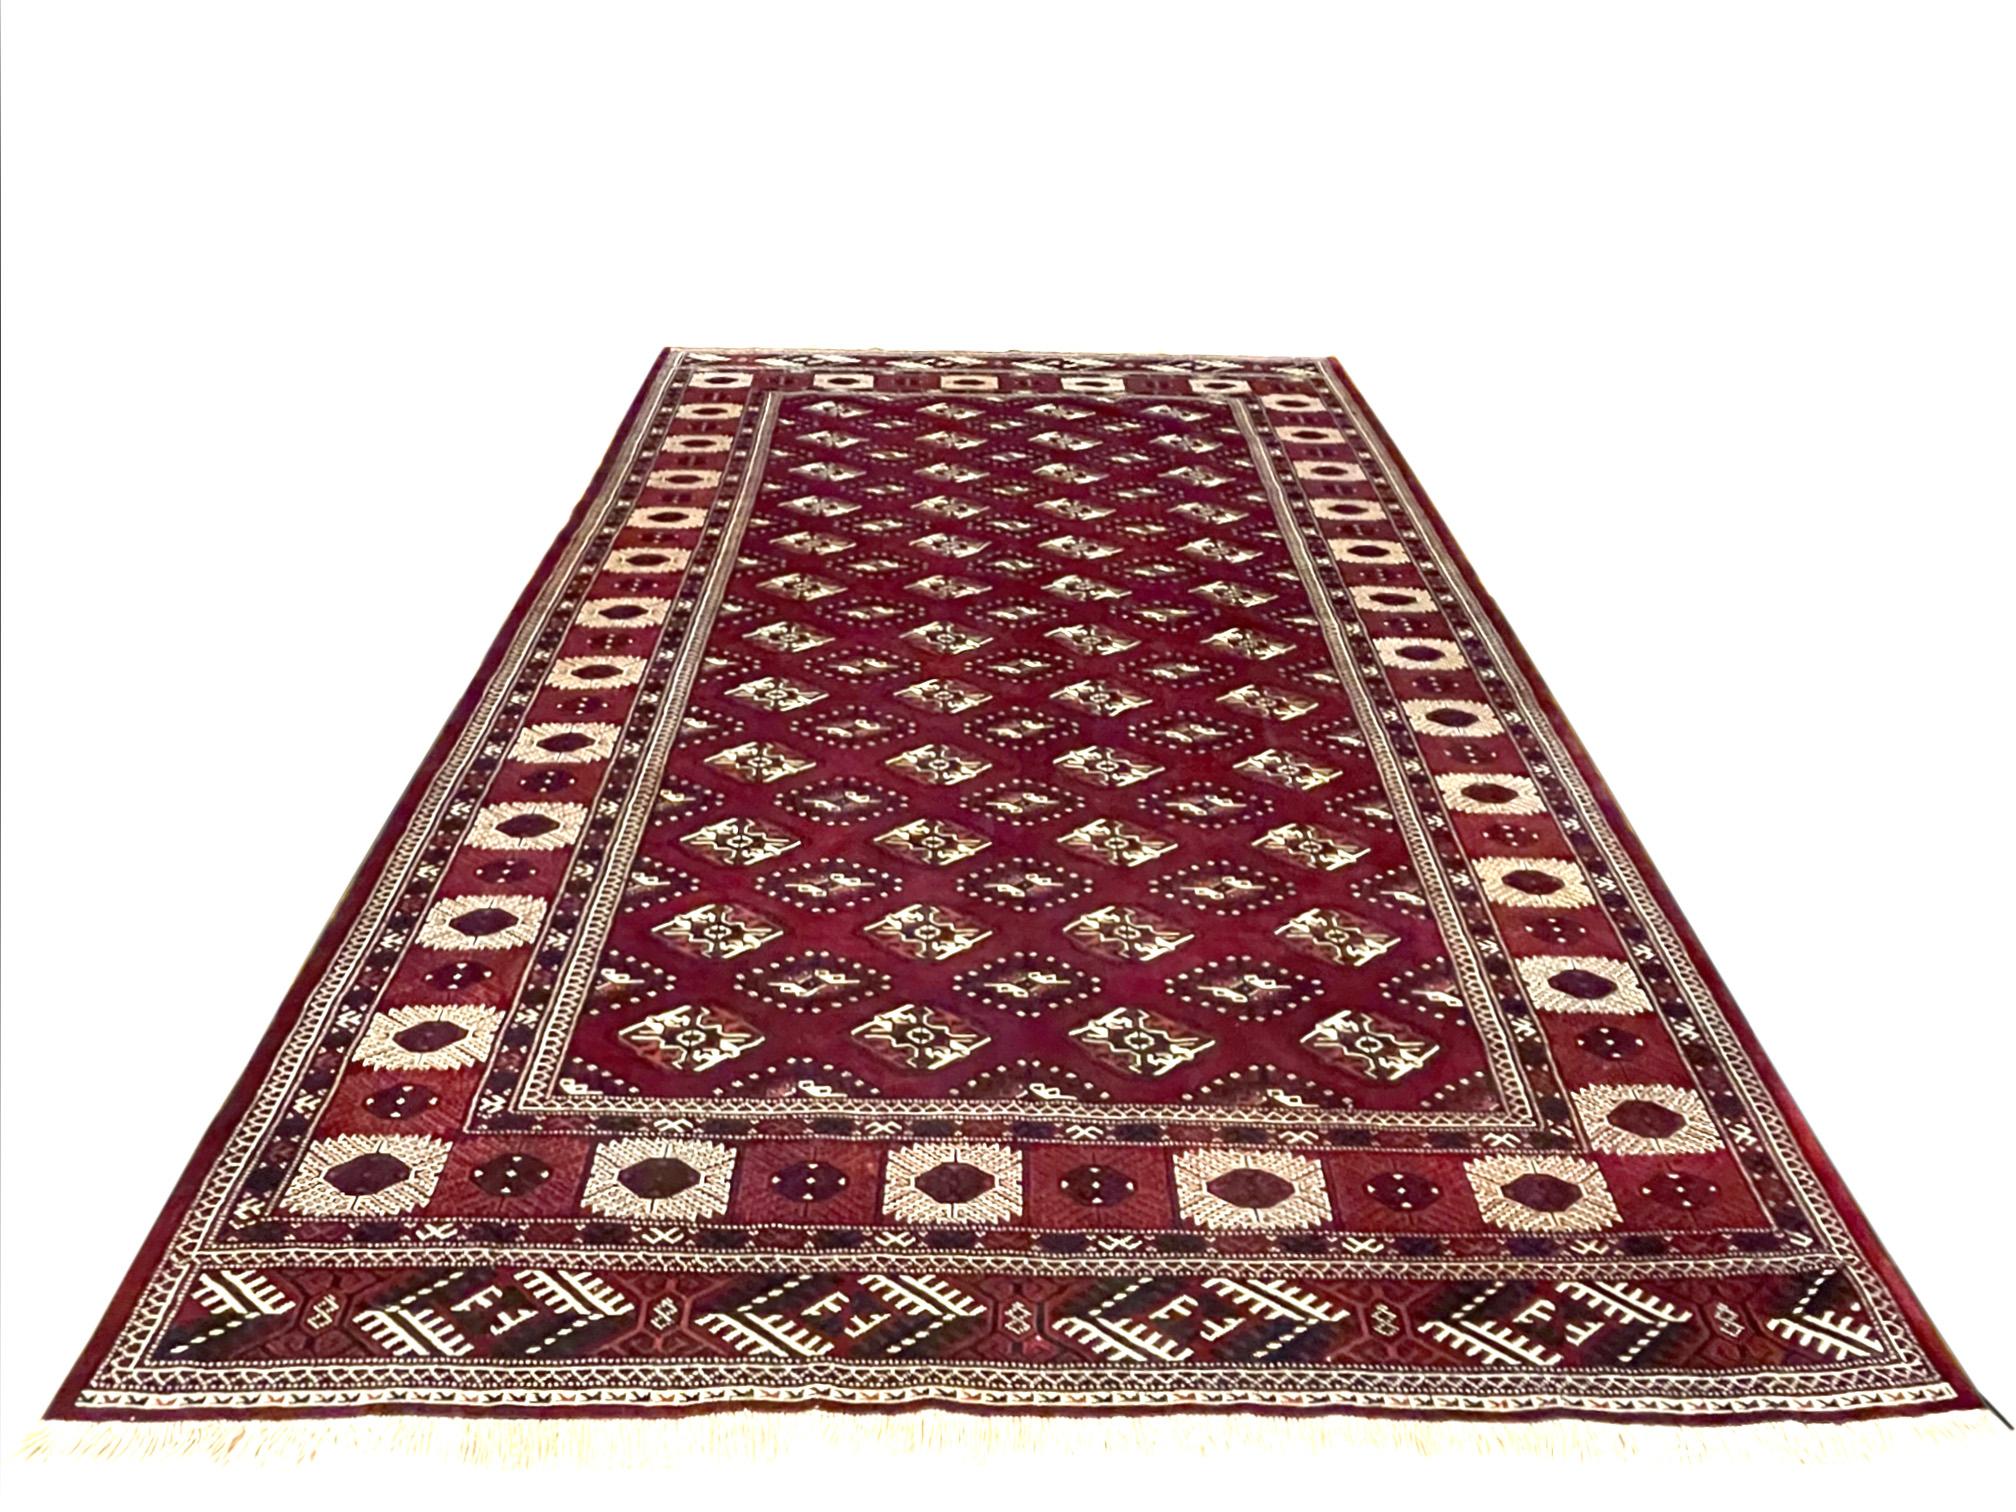 The Turkmen tribes live in the north and north-east of Iran; Turkmen rugs are very distinctive dominated with red colors. This piece is a Persian hand knotted Turkmen rug has wool pile and cotton foundation with geometric – elephant print design.